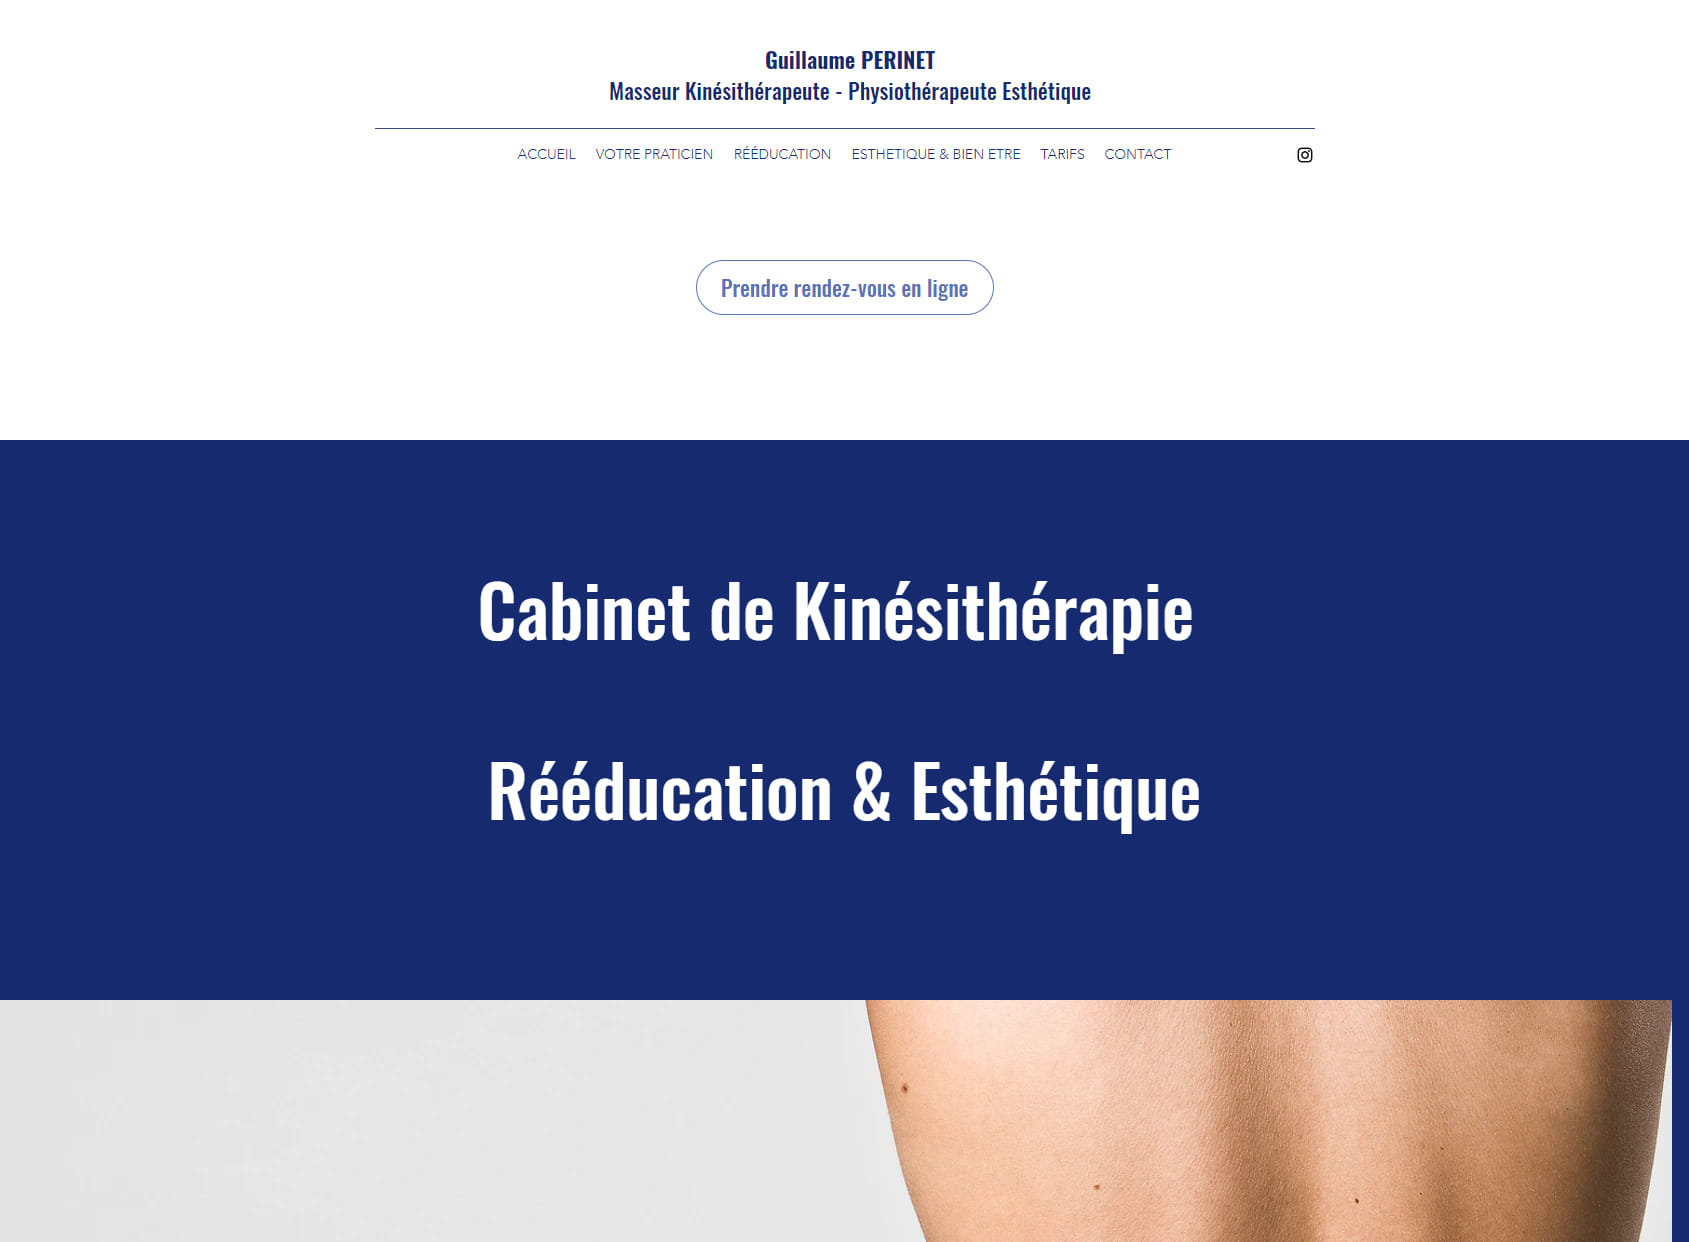 Guillaume Perinet Aesthetic Medical & Re-Education - Hydrafacial, Radiofréquence, Drainage Lymphatique Manuel, Ems Bodysculpt, Massage / Antony 92 91 94